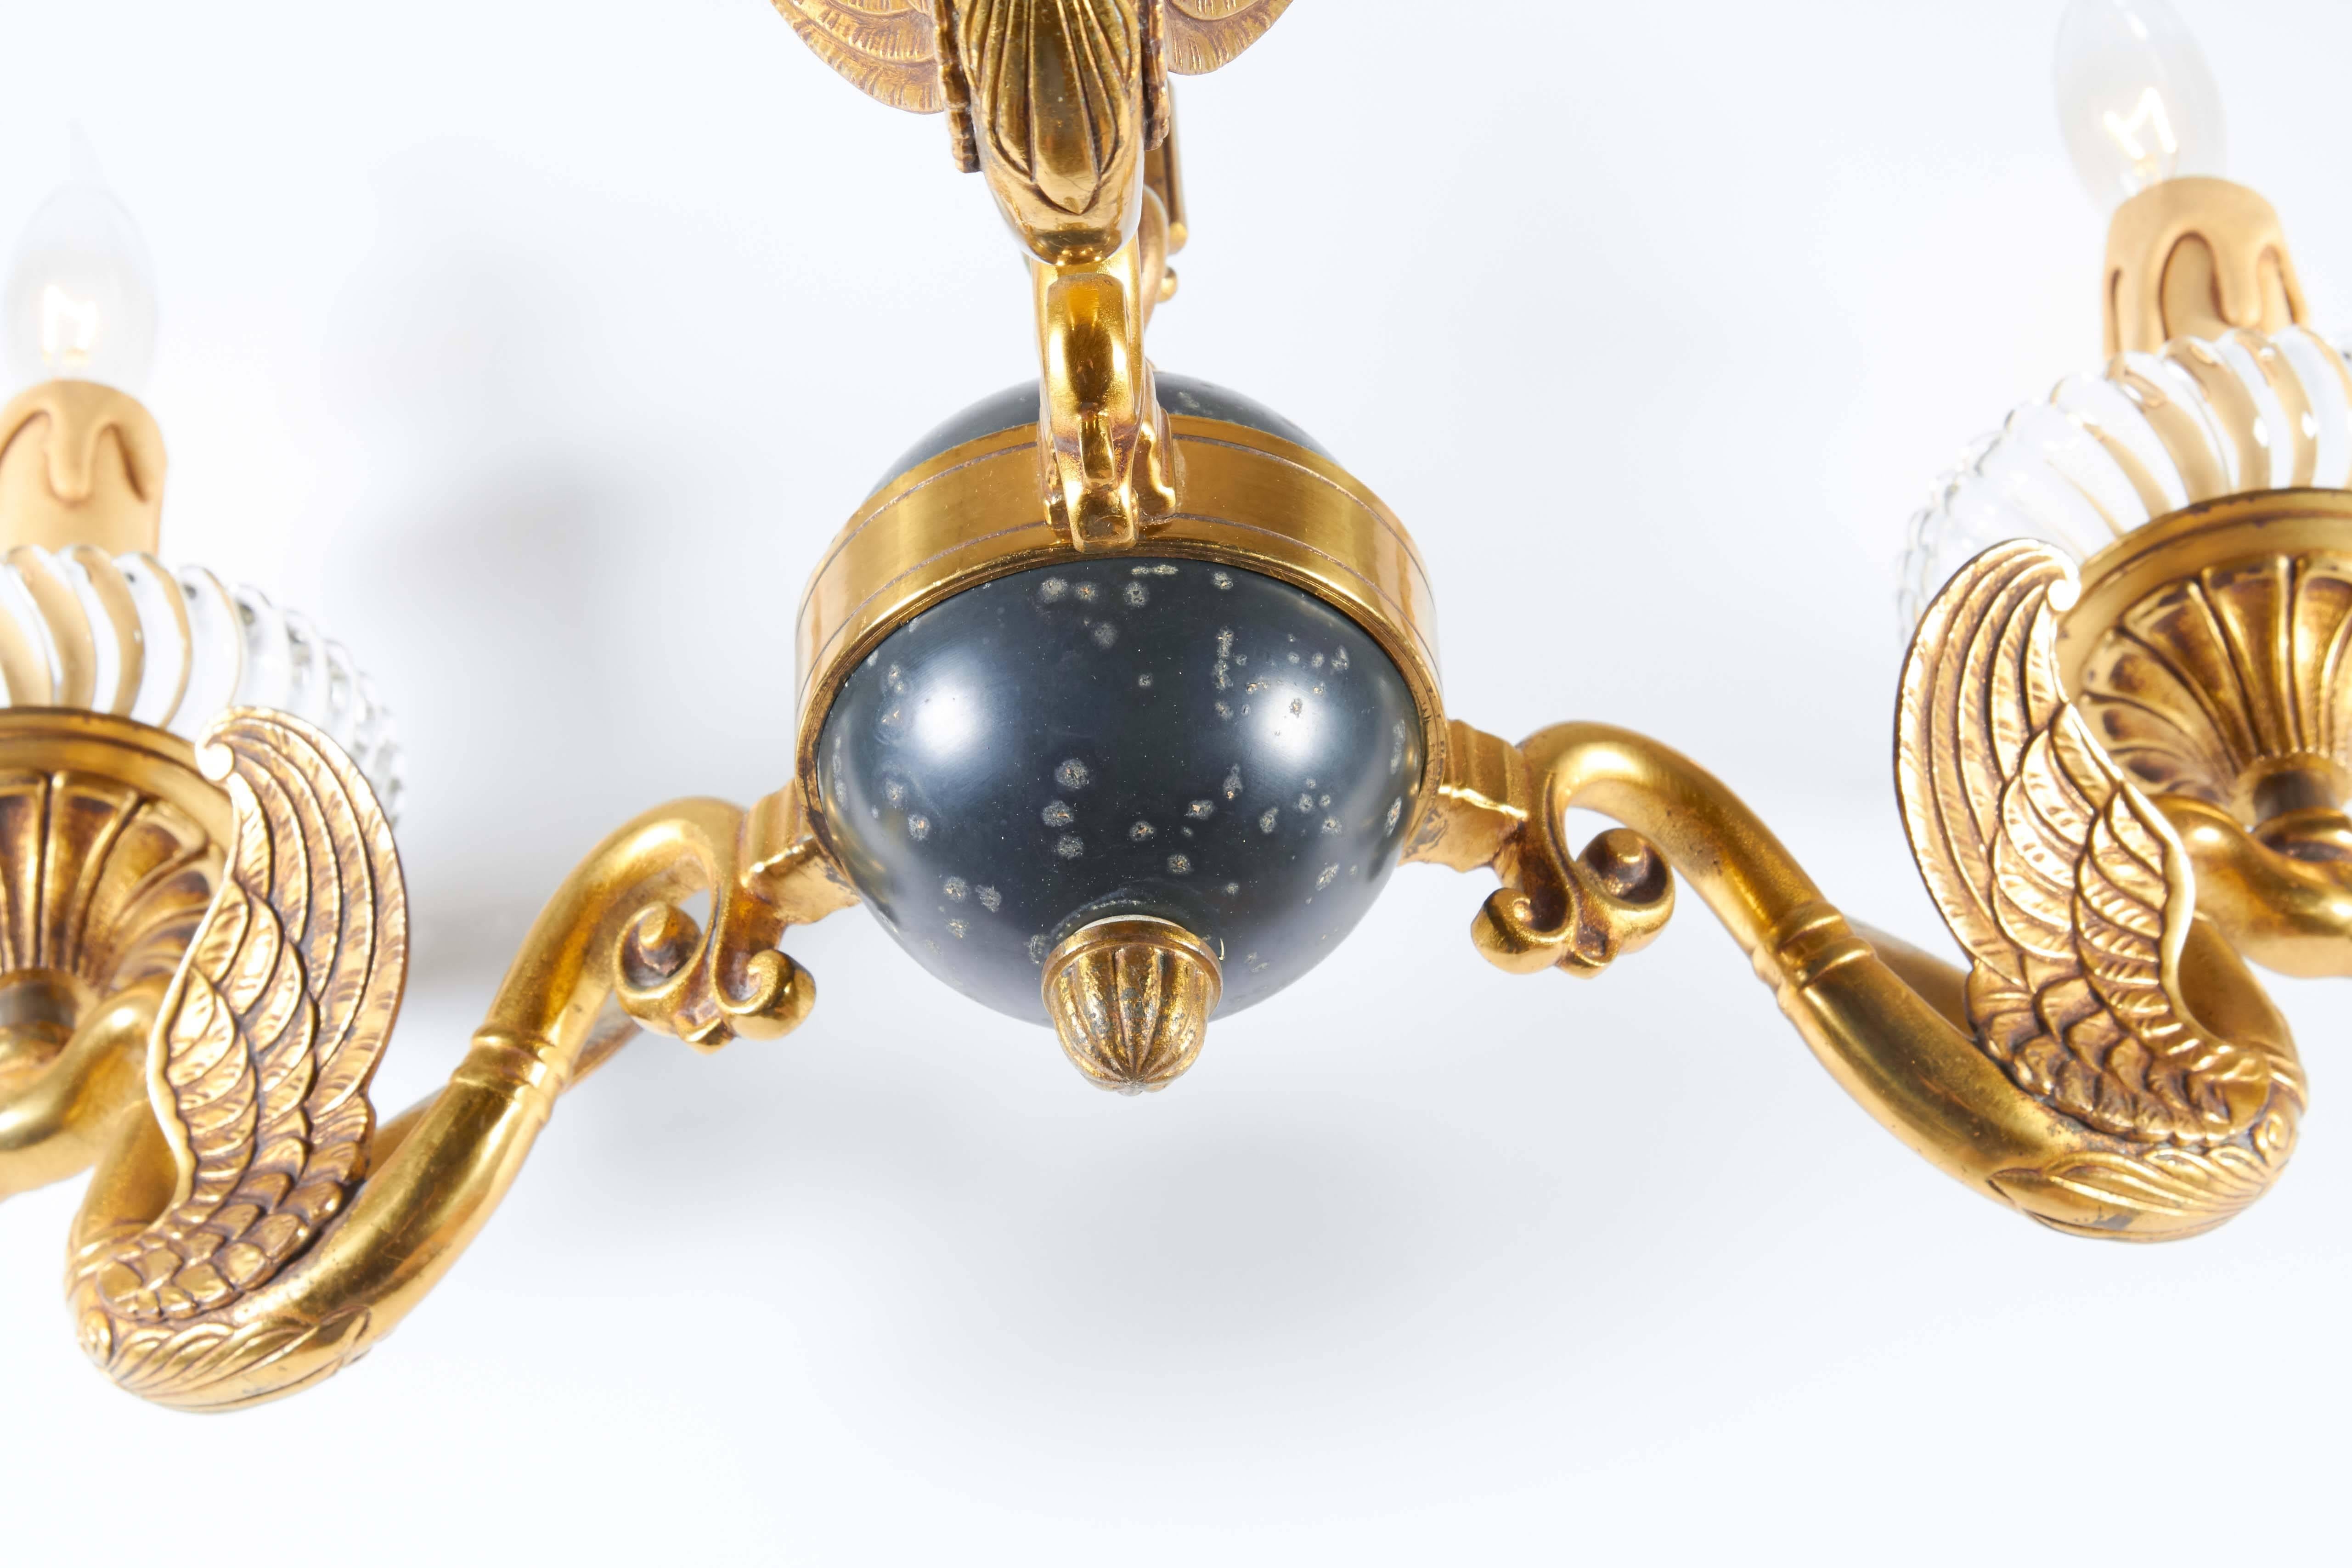 Mid-20th Century Italian Empire Celestial Globe Chandelier with Swan Motif Arms